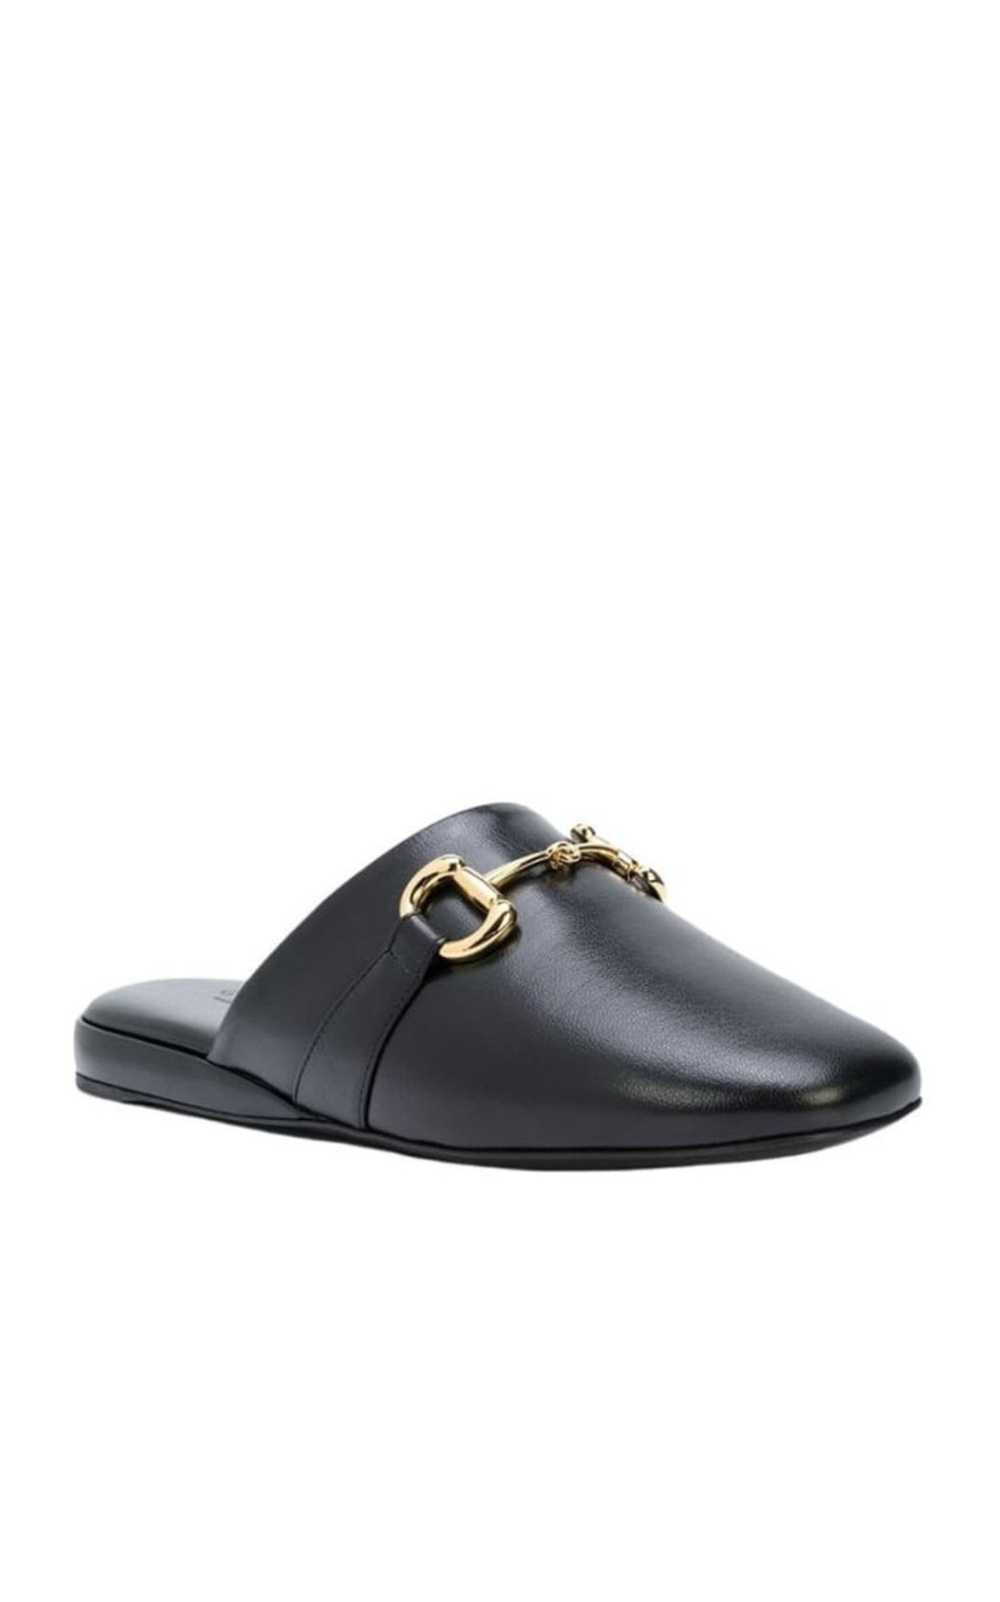 GUCCI Pericle Horsebit Leather Slippers - image 3